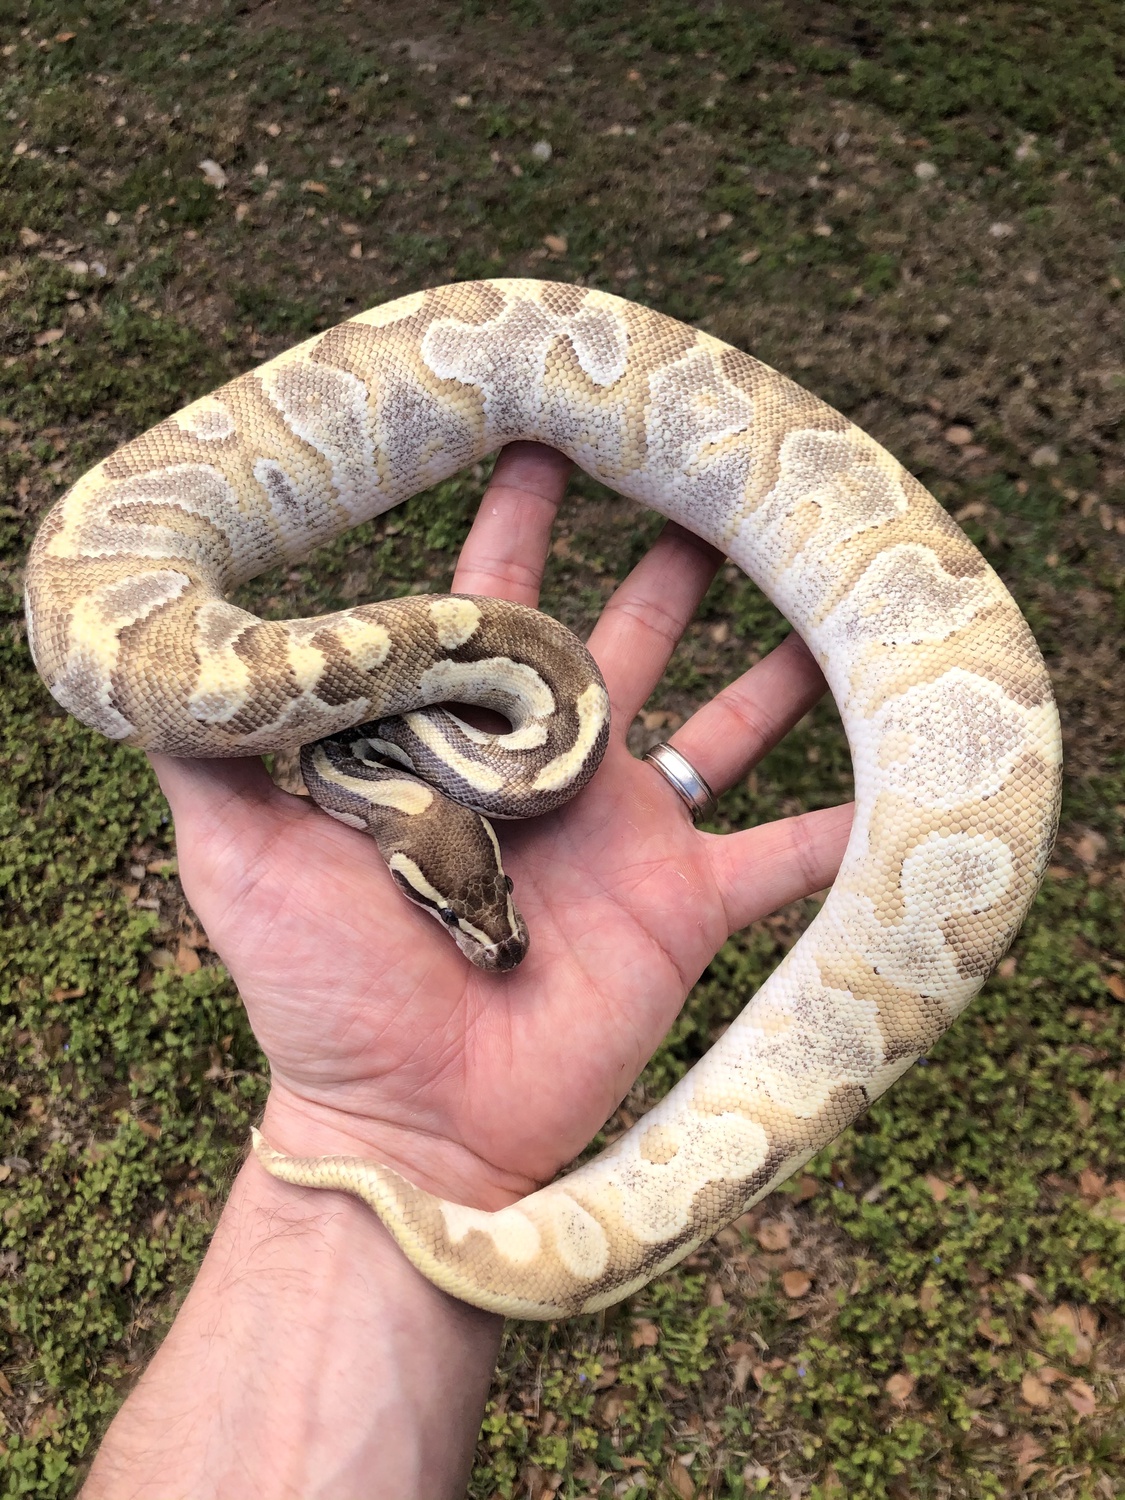 Super McKenzie Enchi Mojave Ball Python by The Florida Reptile Ranch